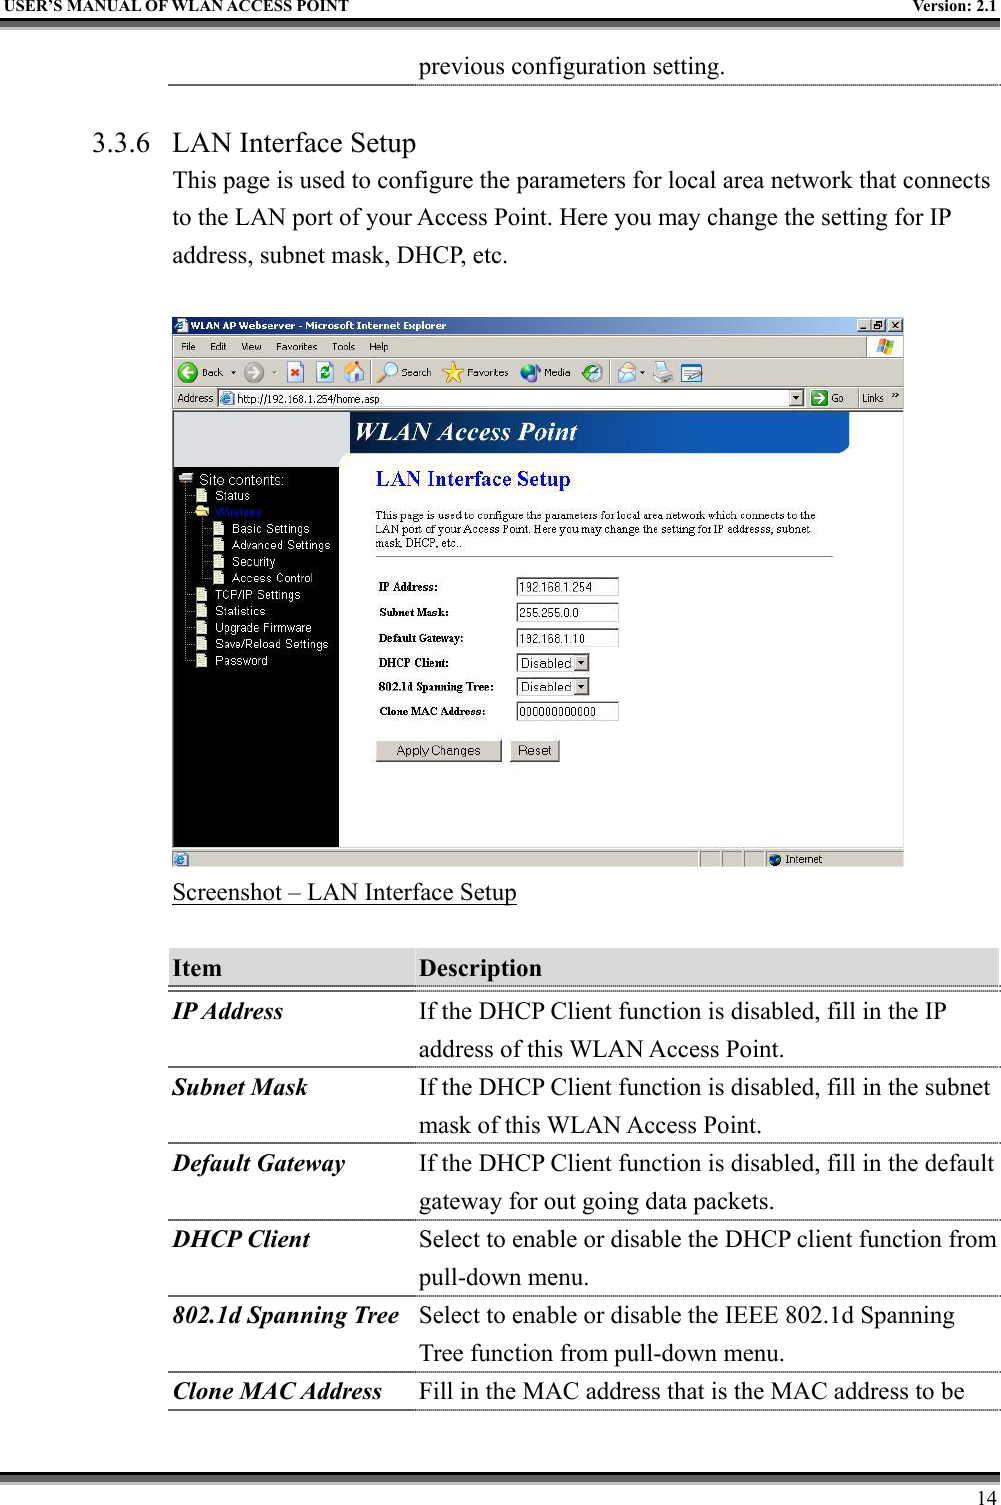   USER’S MANUAL OF WLAN ACCESS POINT    Version: 2.1     14 previous configuration setting.  3.3.6  LAN Interface Setup This page is used to configure the parameters for local area network that connects to the LAN port of your Access Point. Here you may change the setting for IP address, subnet mask, DHCP, etc.   Screenshot – LAN Interface Setup  Item  Description   IP Address If the DHCP Client function is disabled, fill in the IP address of this WLAN Access Point. Subnet Mask If the DHCP Client function is disabled, fill in the subnet mask of this WLAN Access Point. Default Gateway If the DHCP Client function is disabled, fill in the default gateway for out going data packets. DHCP Client  Select to enable or disable the DHCP client function from pull-down menu. 802.1d Spanning Tree Select to enable or disable the IEEE 802.1d Spanning Tree function from pull-down menu. Clone MAC Address  Fill in the MAC address that is the MAC address to be 